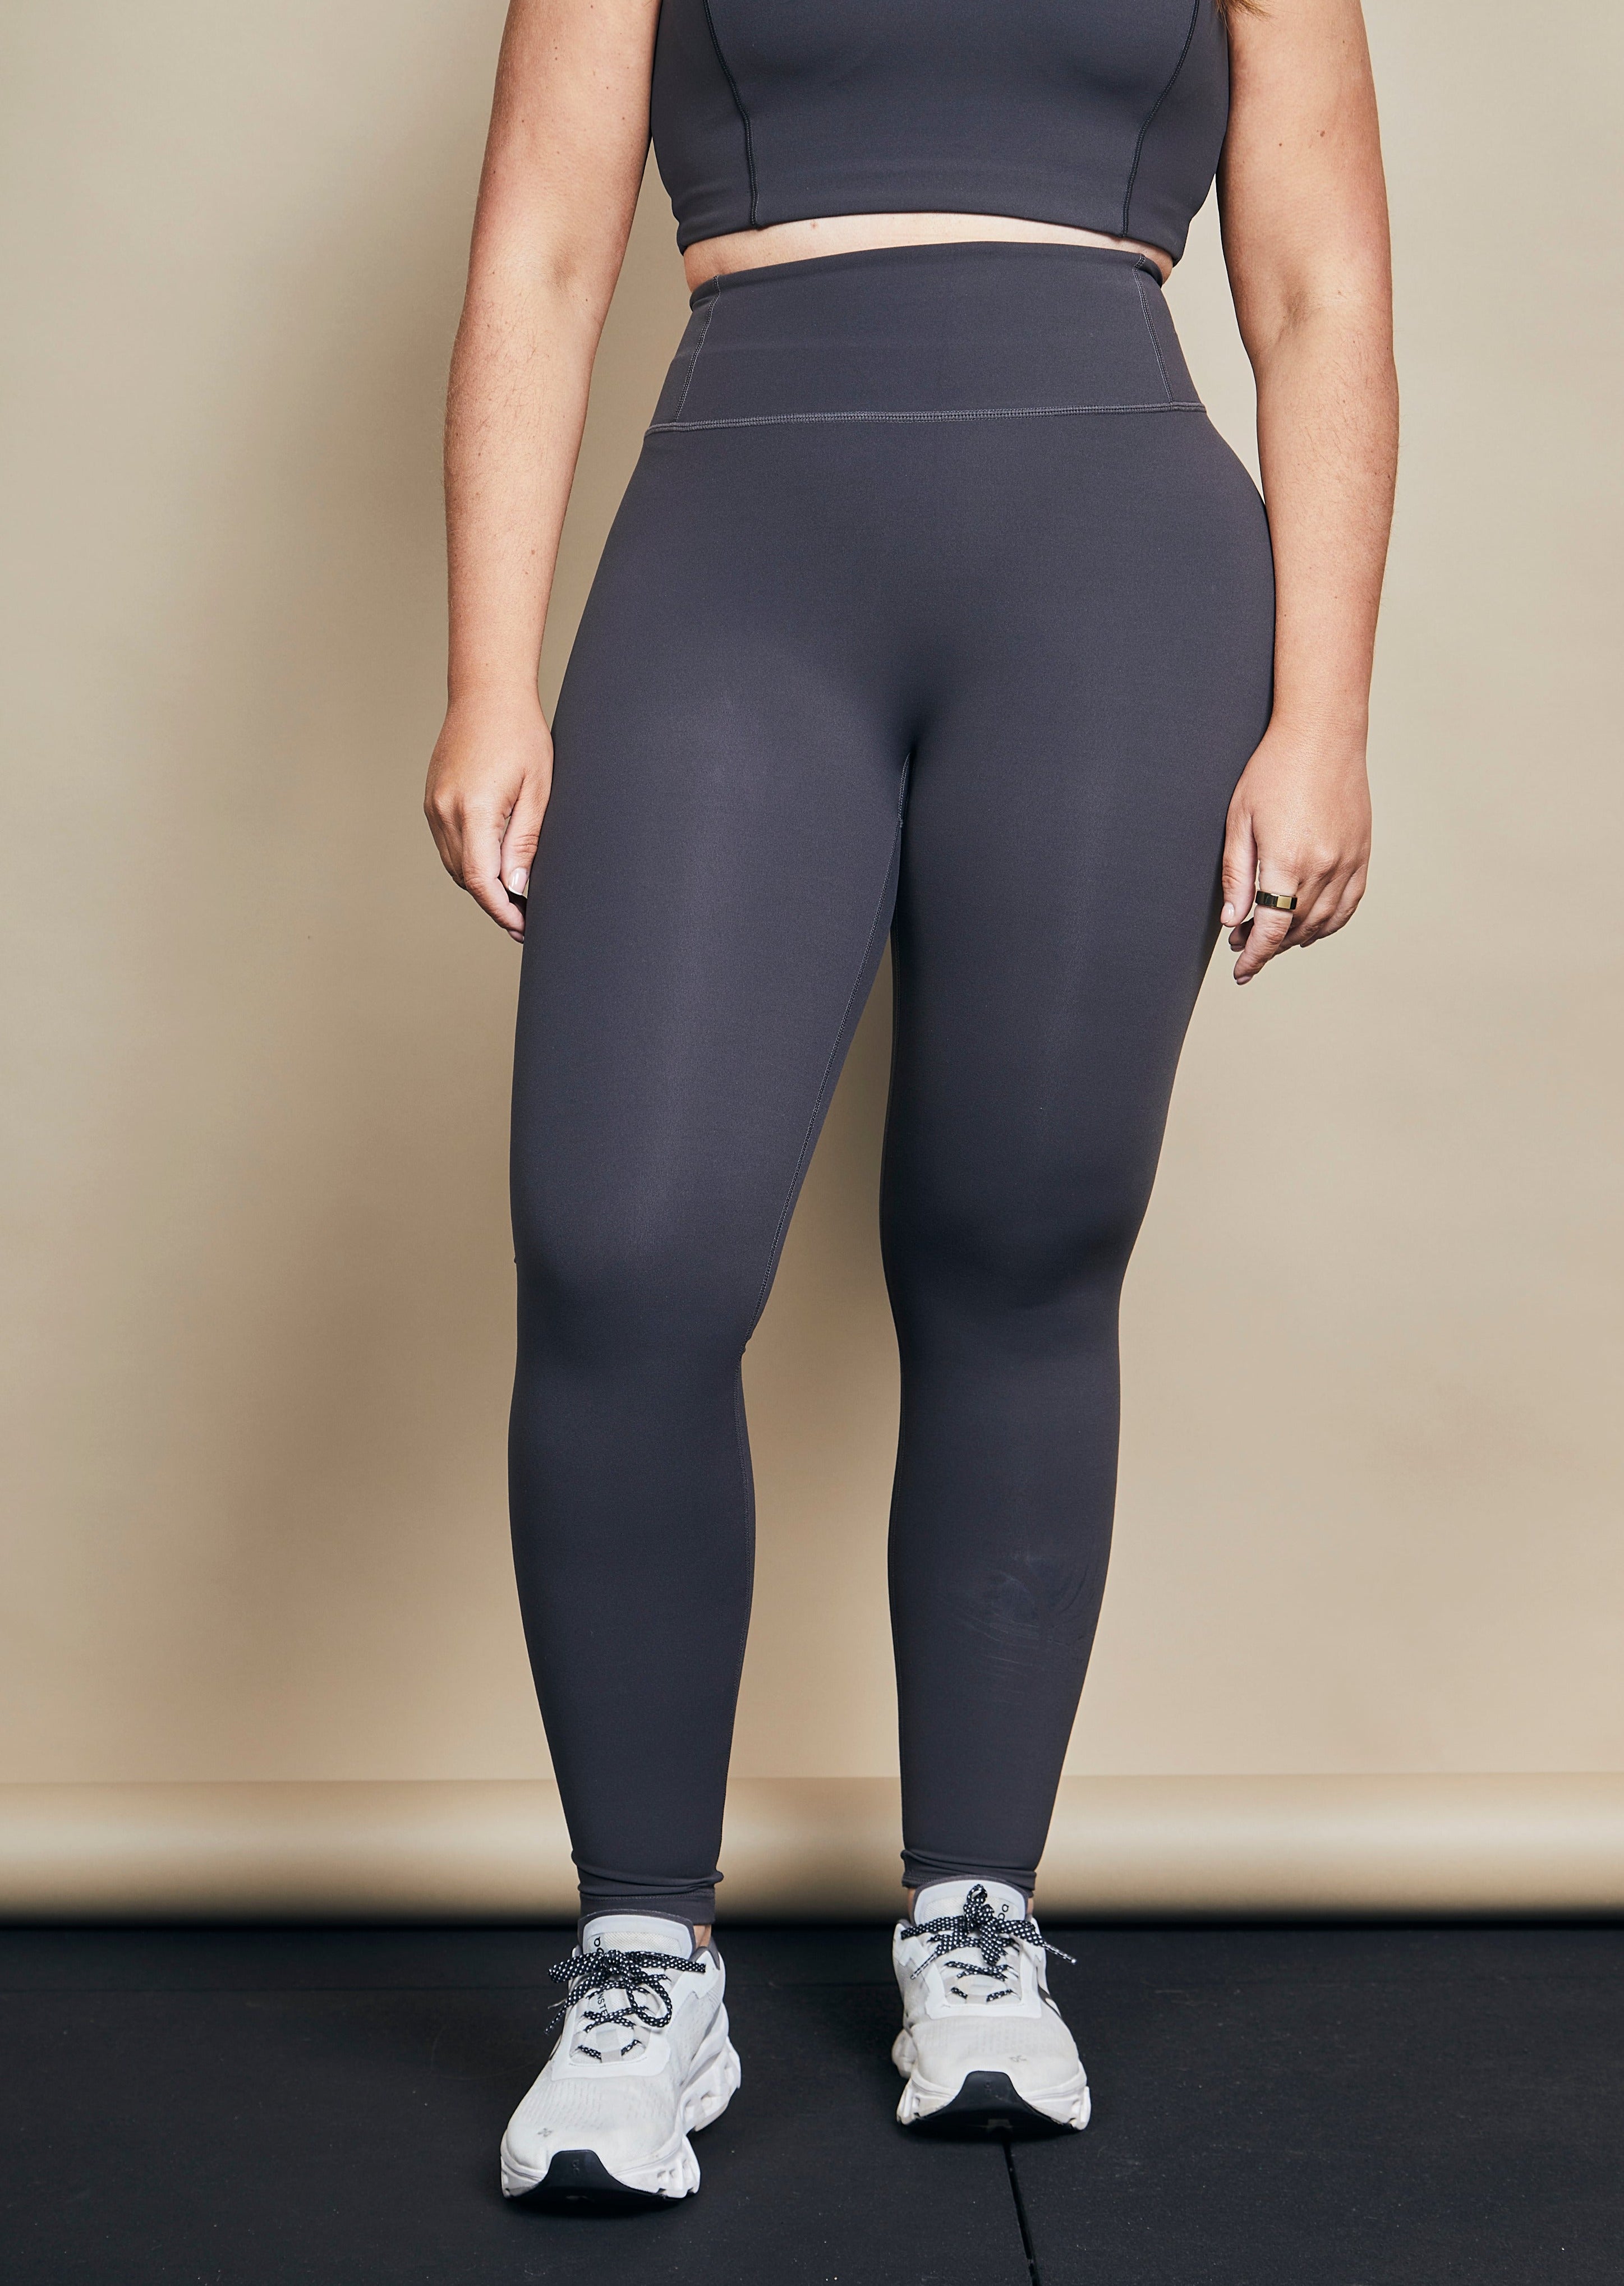 The Black High-waisted LUX Leggings